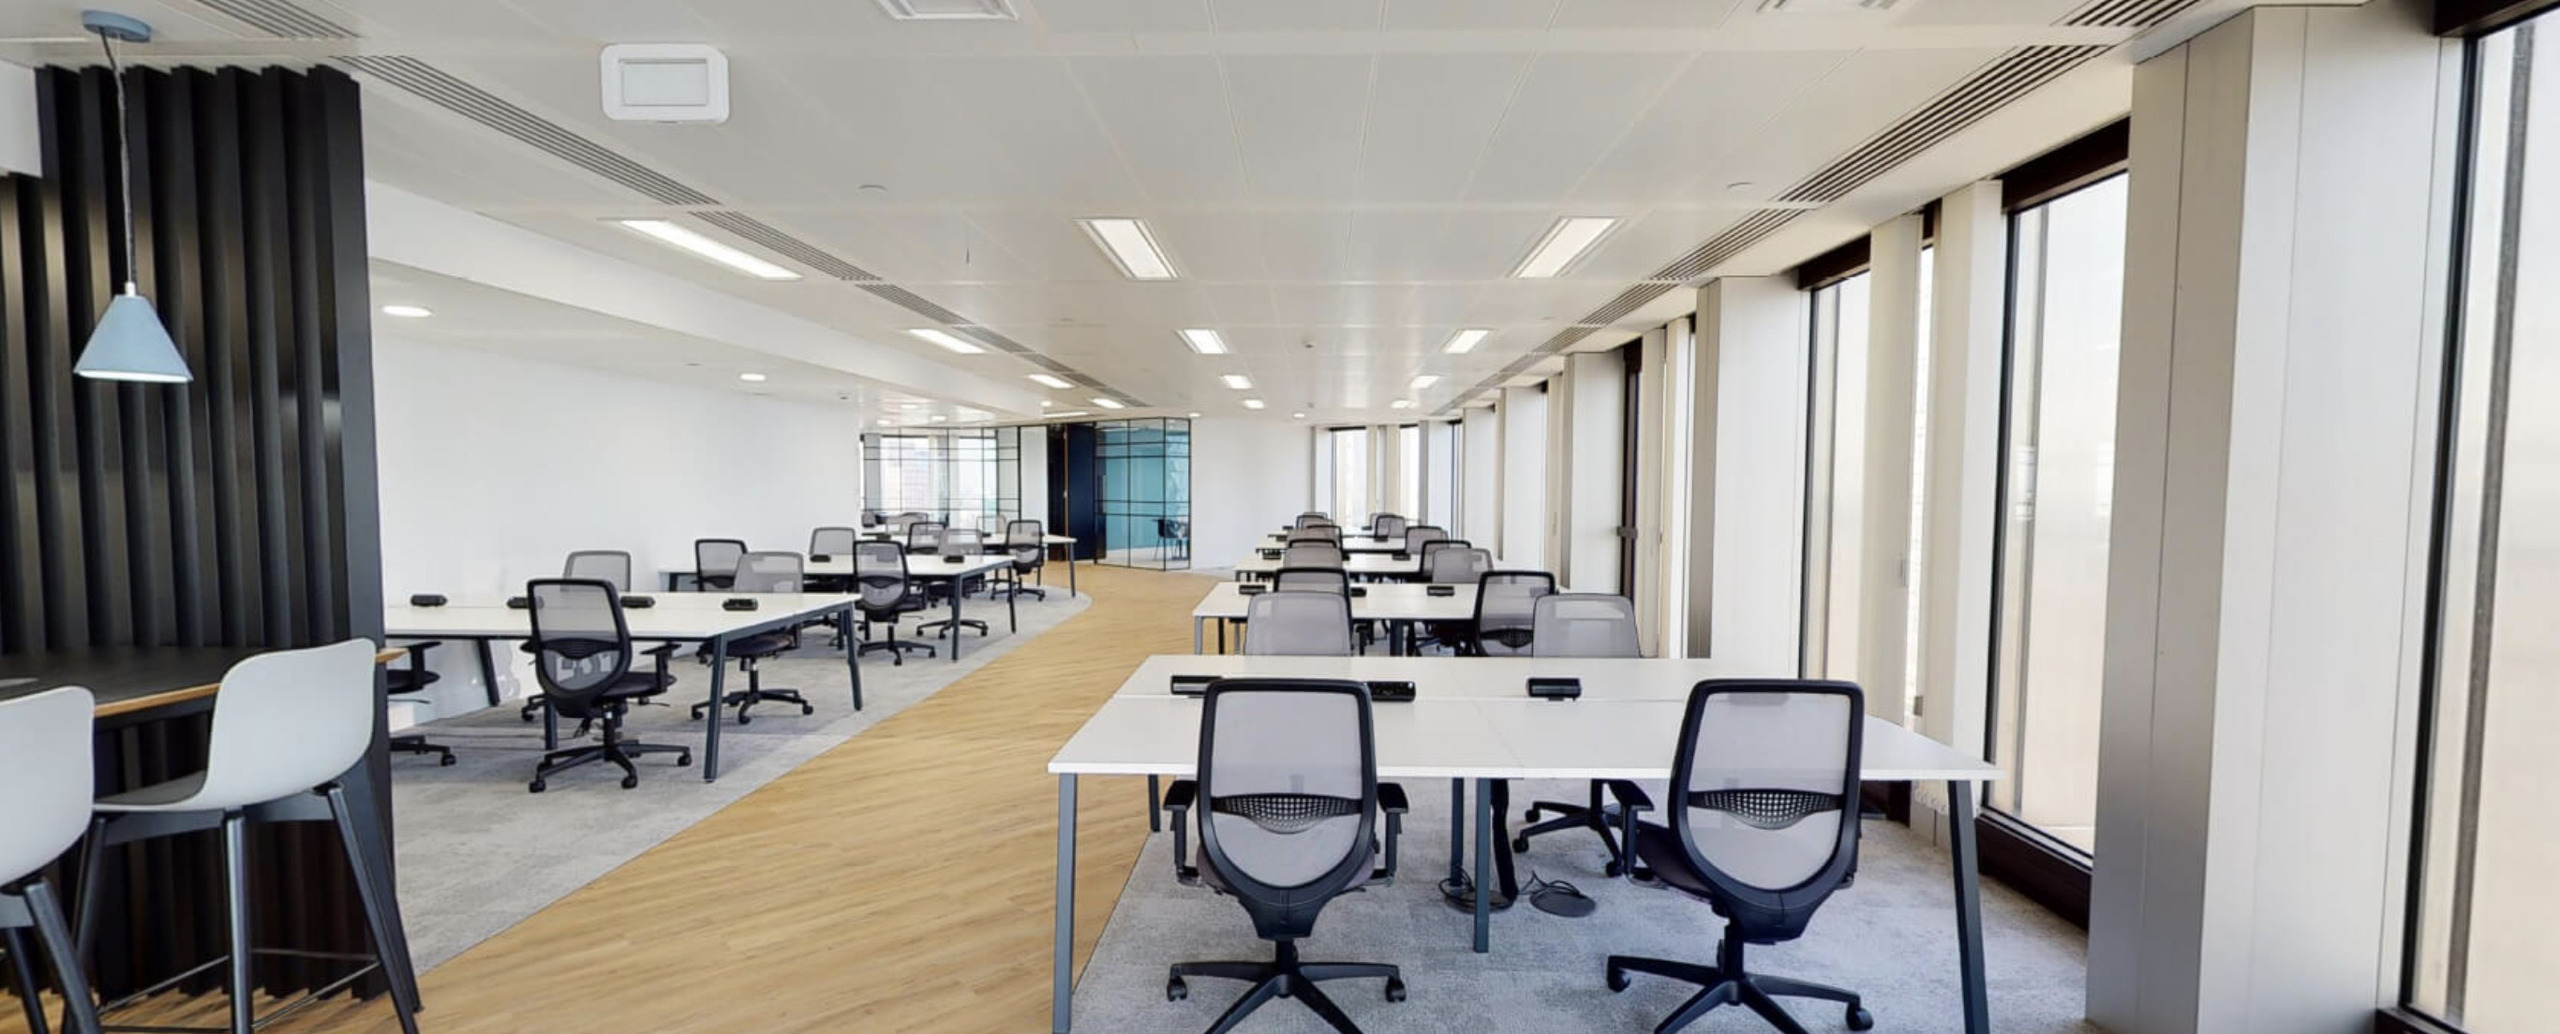 125 Old Broad Street, EC2N 1AR The City of London - Business centre 10 m² ○